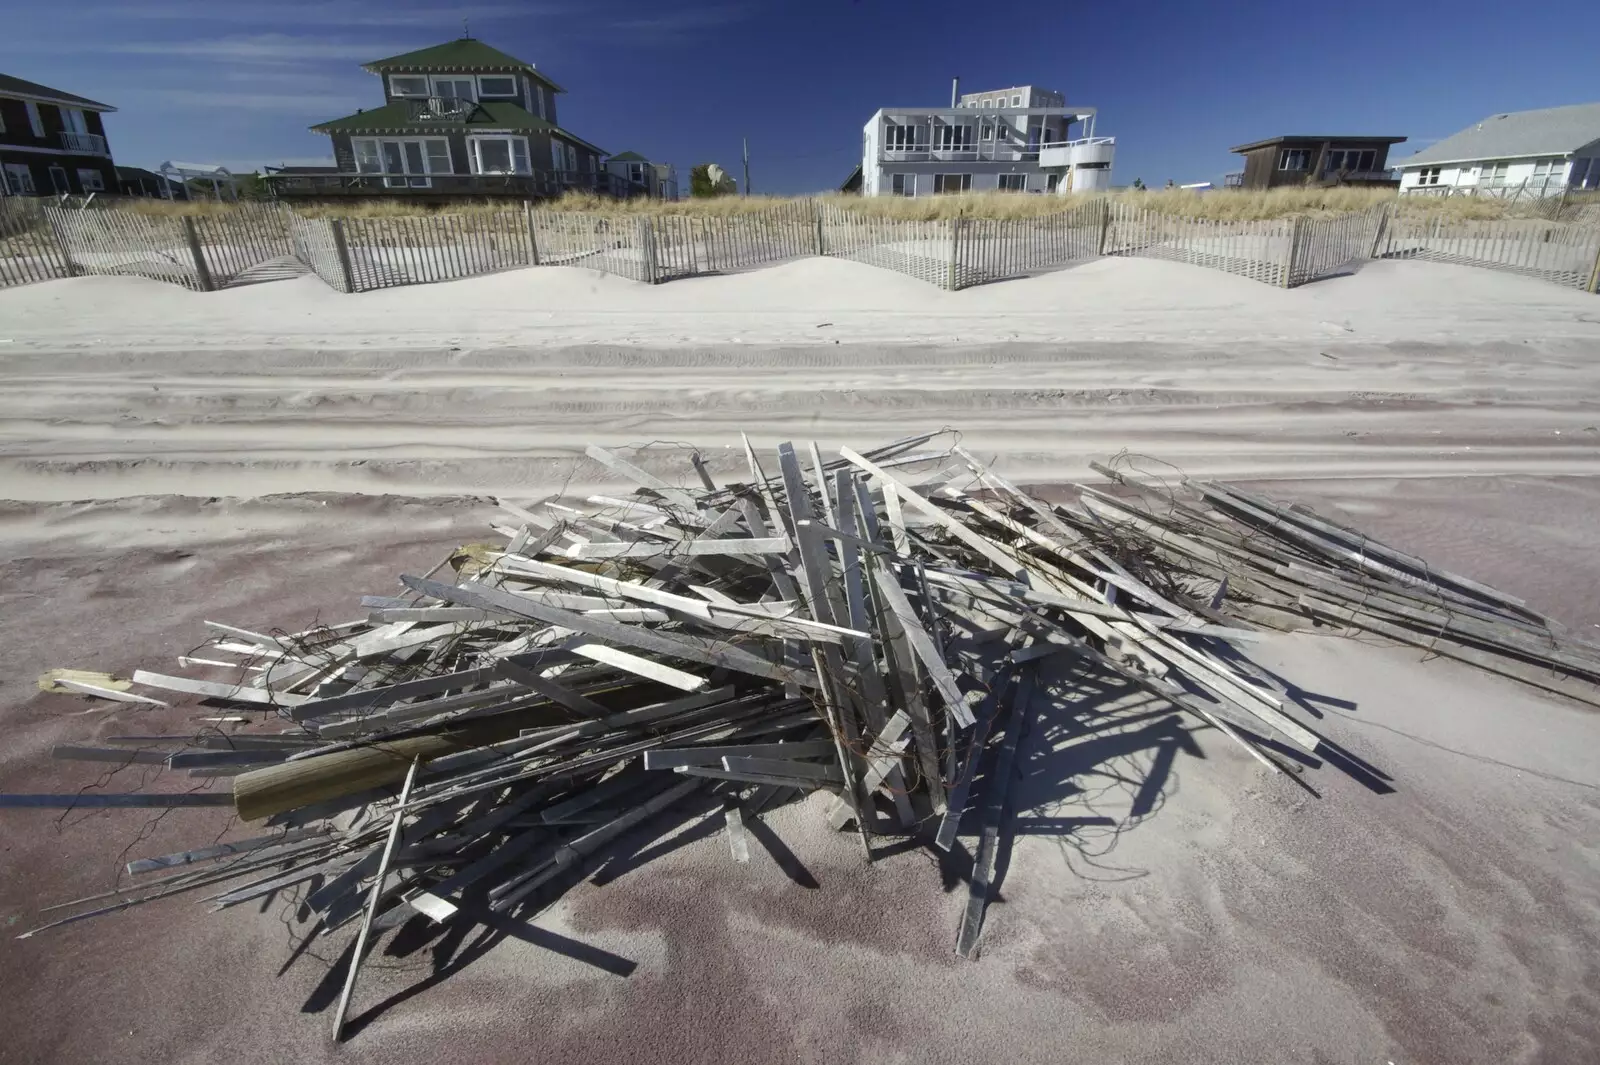 A stack of discarded fencing lies on the beach, from A Return to Fire Island, Long Island, New York State, US - 30th March 2007